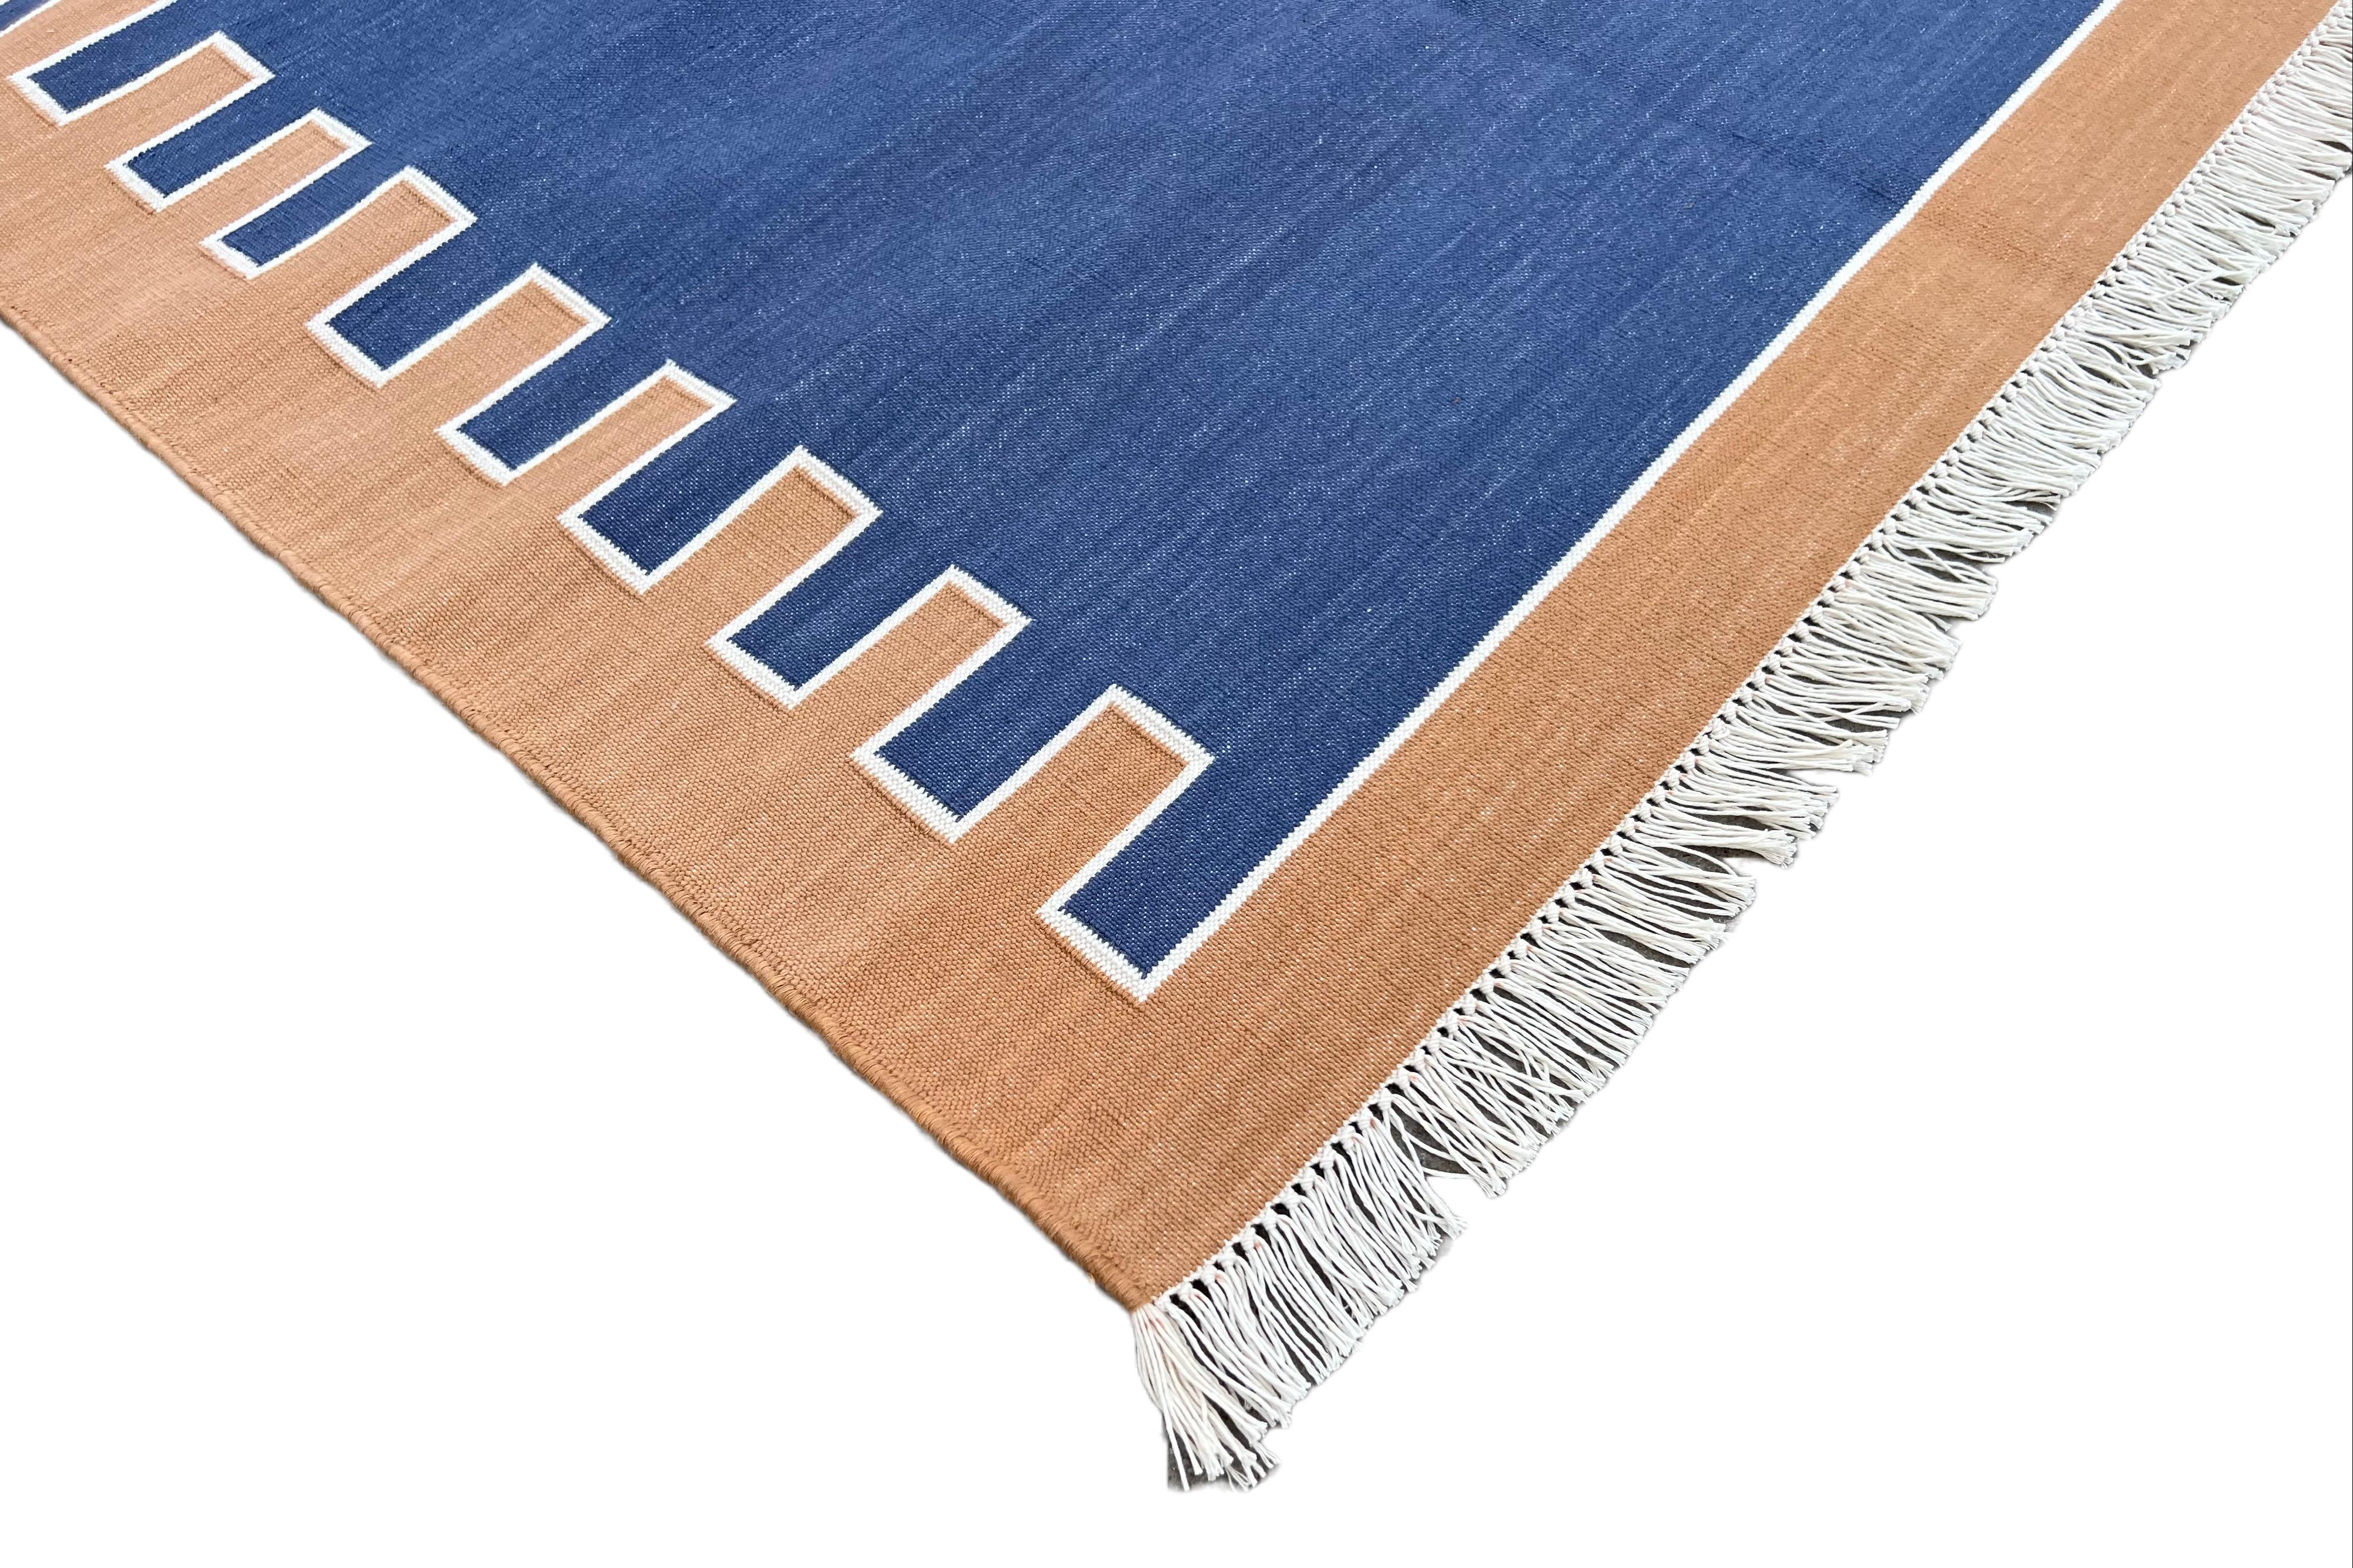 Indian Handmade Cotton Area Flat Weave Rug, 3x5 Blue And Tan Zig Zag Striped Dhurrie For Sale